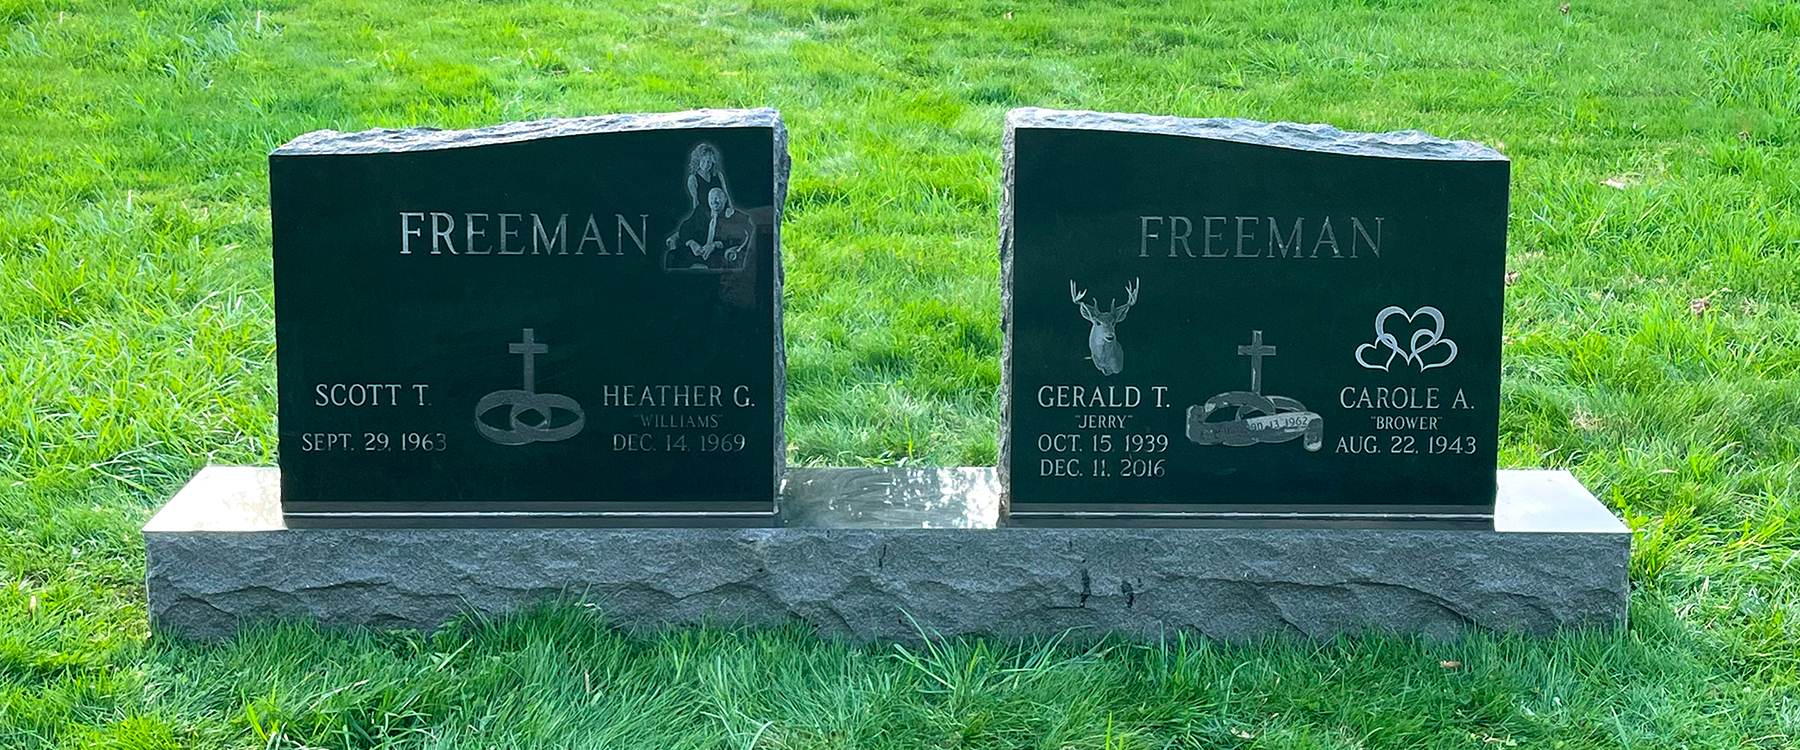 Examples of upright headstones